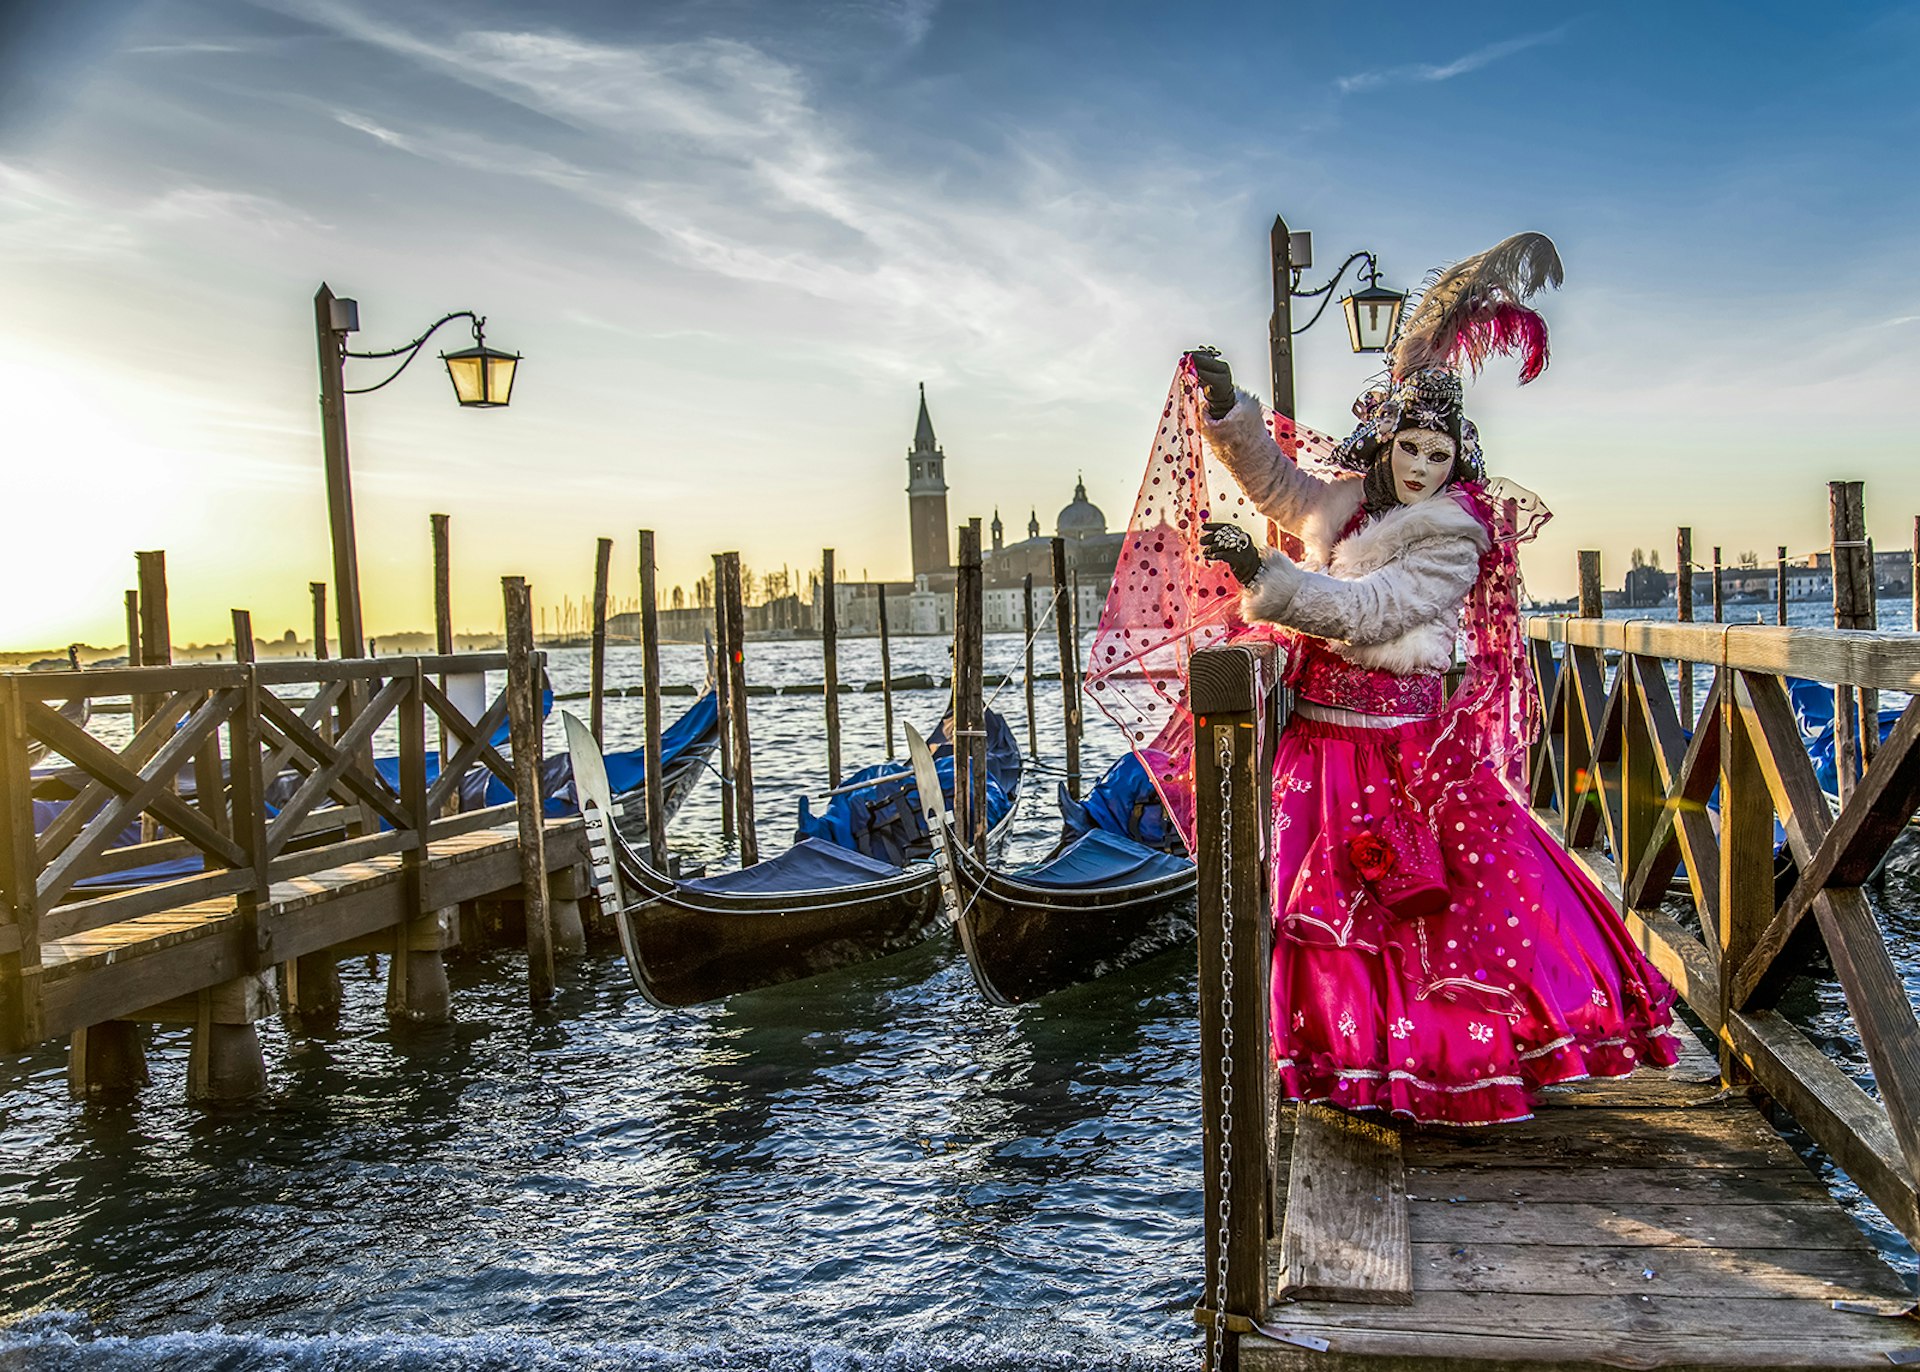 A masked person in a bright pink 18th century Venetian costume throws their wrap into the wind over one of Venice's twinkling canals in front of parked gondolas and a setting sun.